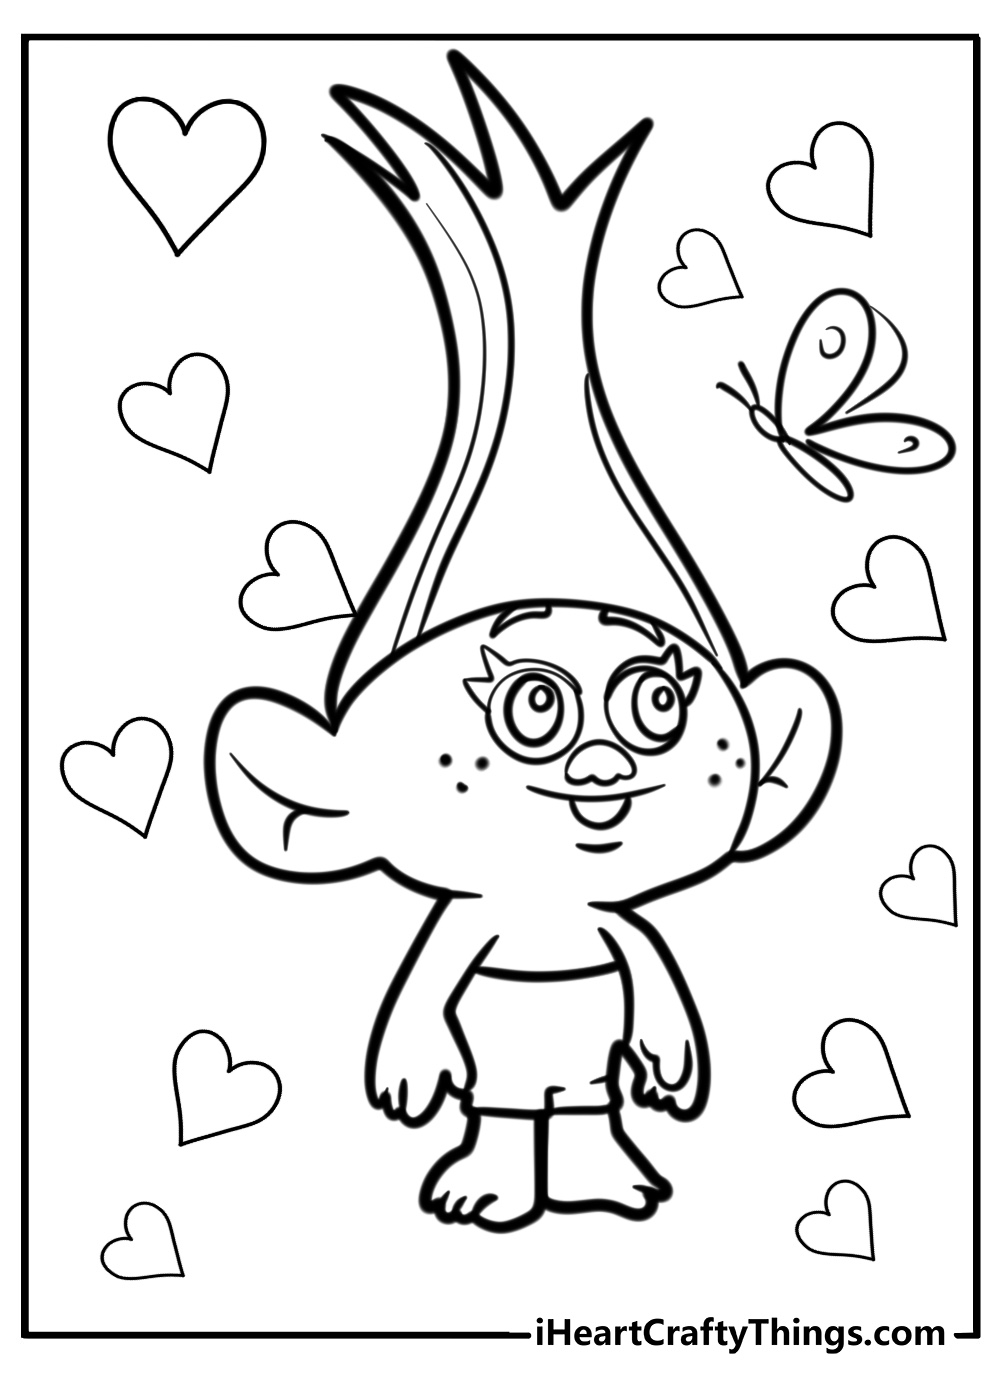 Simple Keith troll coloring page for kids